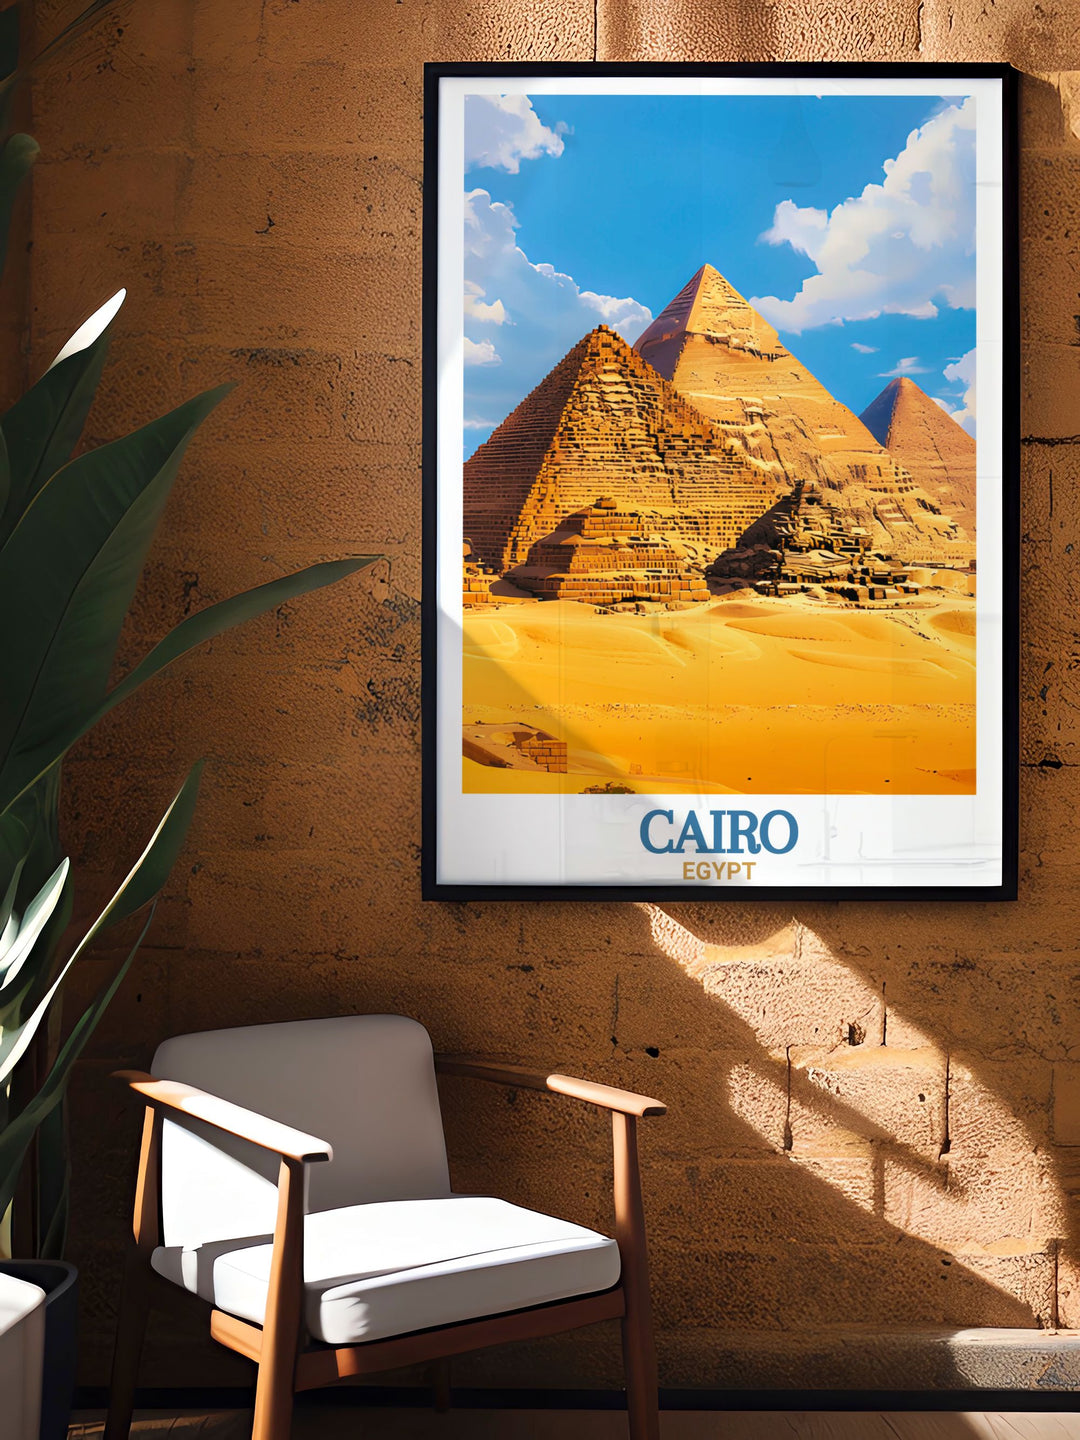 This high quality digital download of The Pyramids of Giza in Cairo captures the essence of the cityscape and its rich history perfect for creating a stunning wall art display in your home.